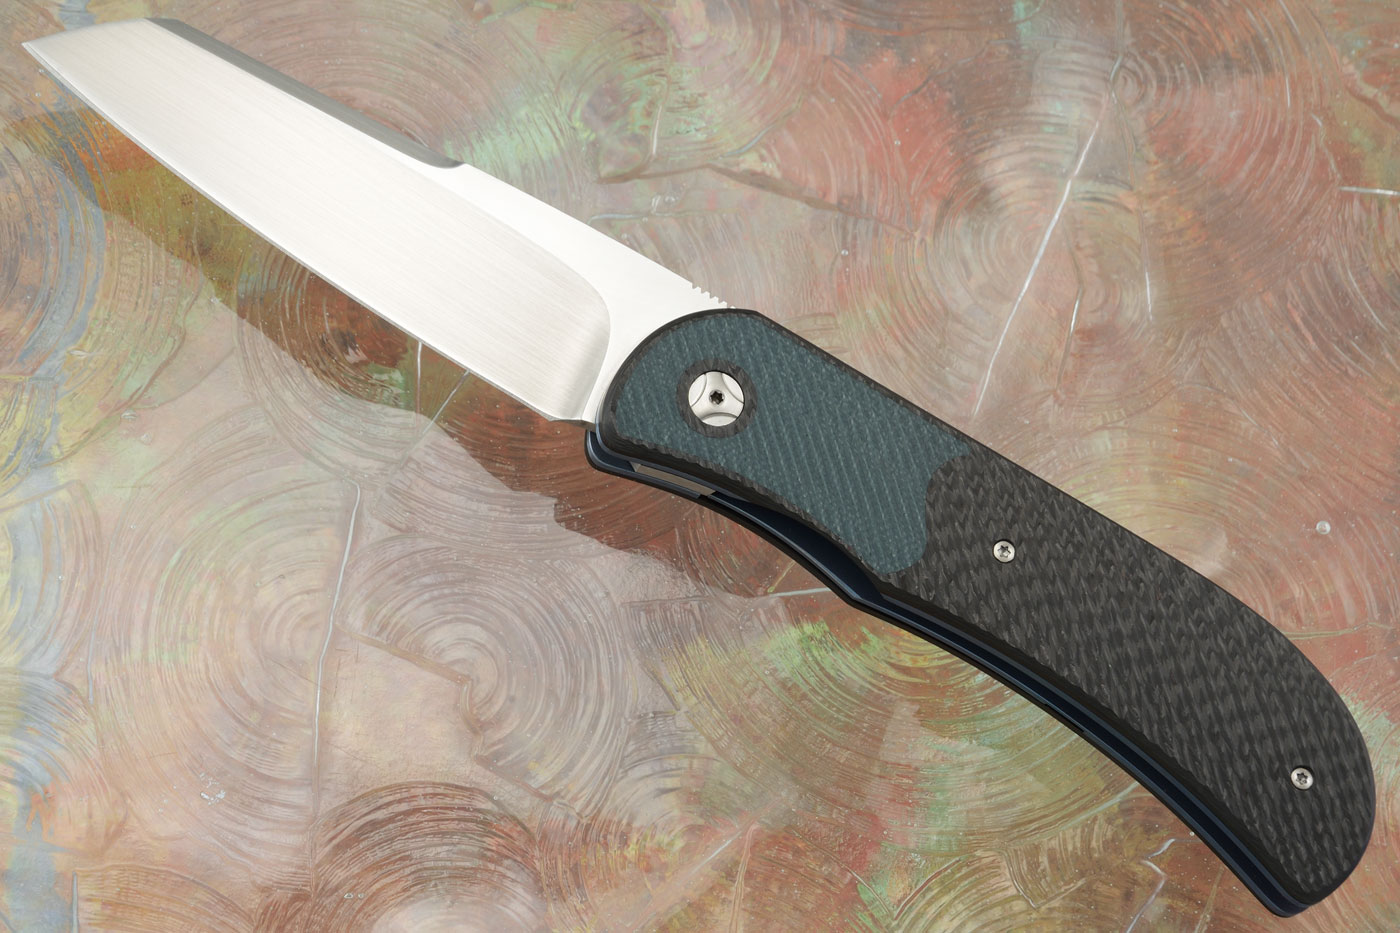 LEXK Plus Front Flipper with Carbon Fiber and Green G10 (Ceramic IKBS)